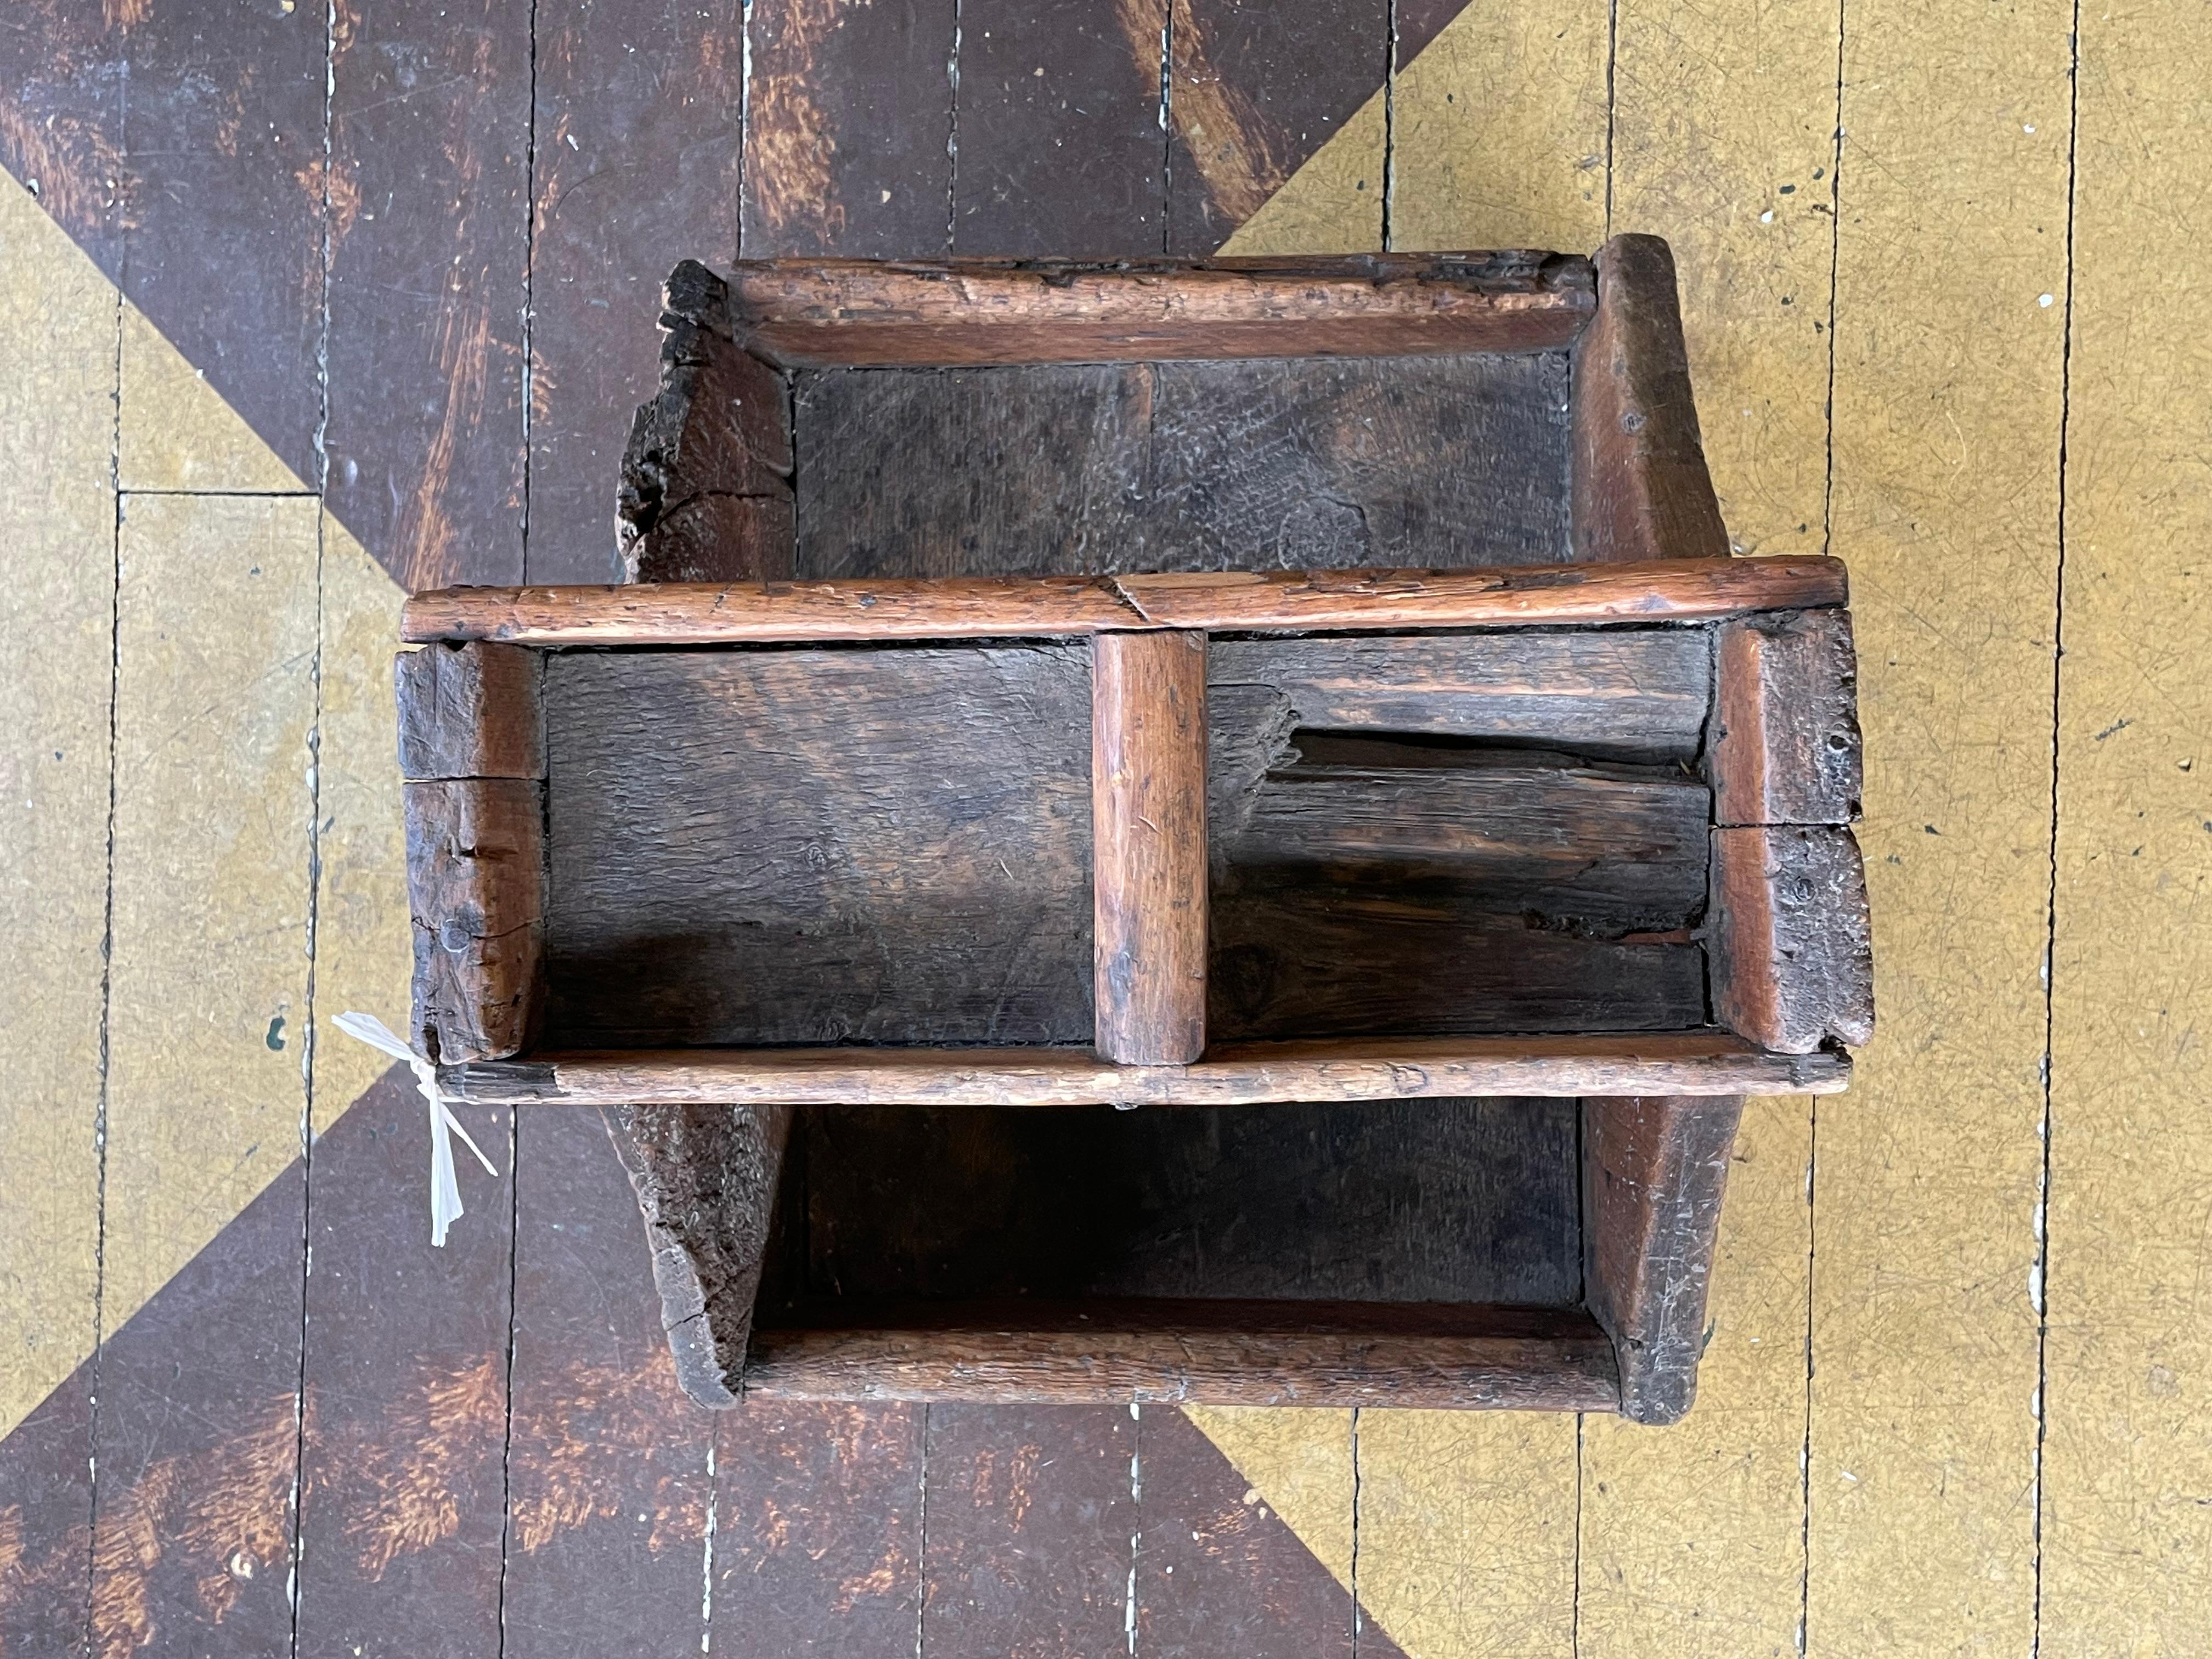 Wonderful Canadian pine Farrier's Tray dating back to the 19th century, with light brown patina. Used originally for carrying tools for shoeing and modifying hooves for Canadian horses. We love repurposing it for corralling newspapers and magazines.